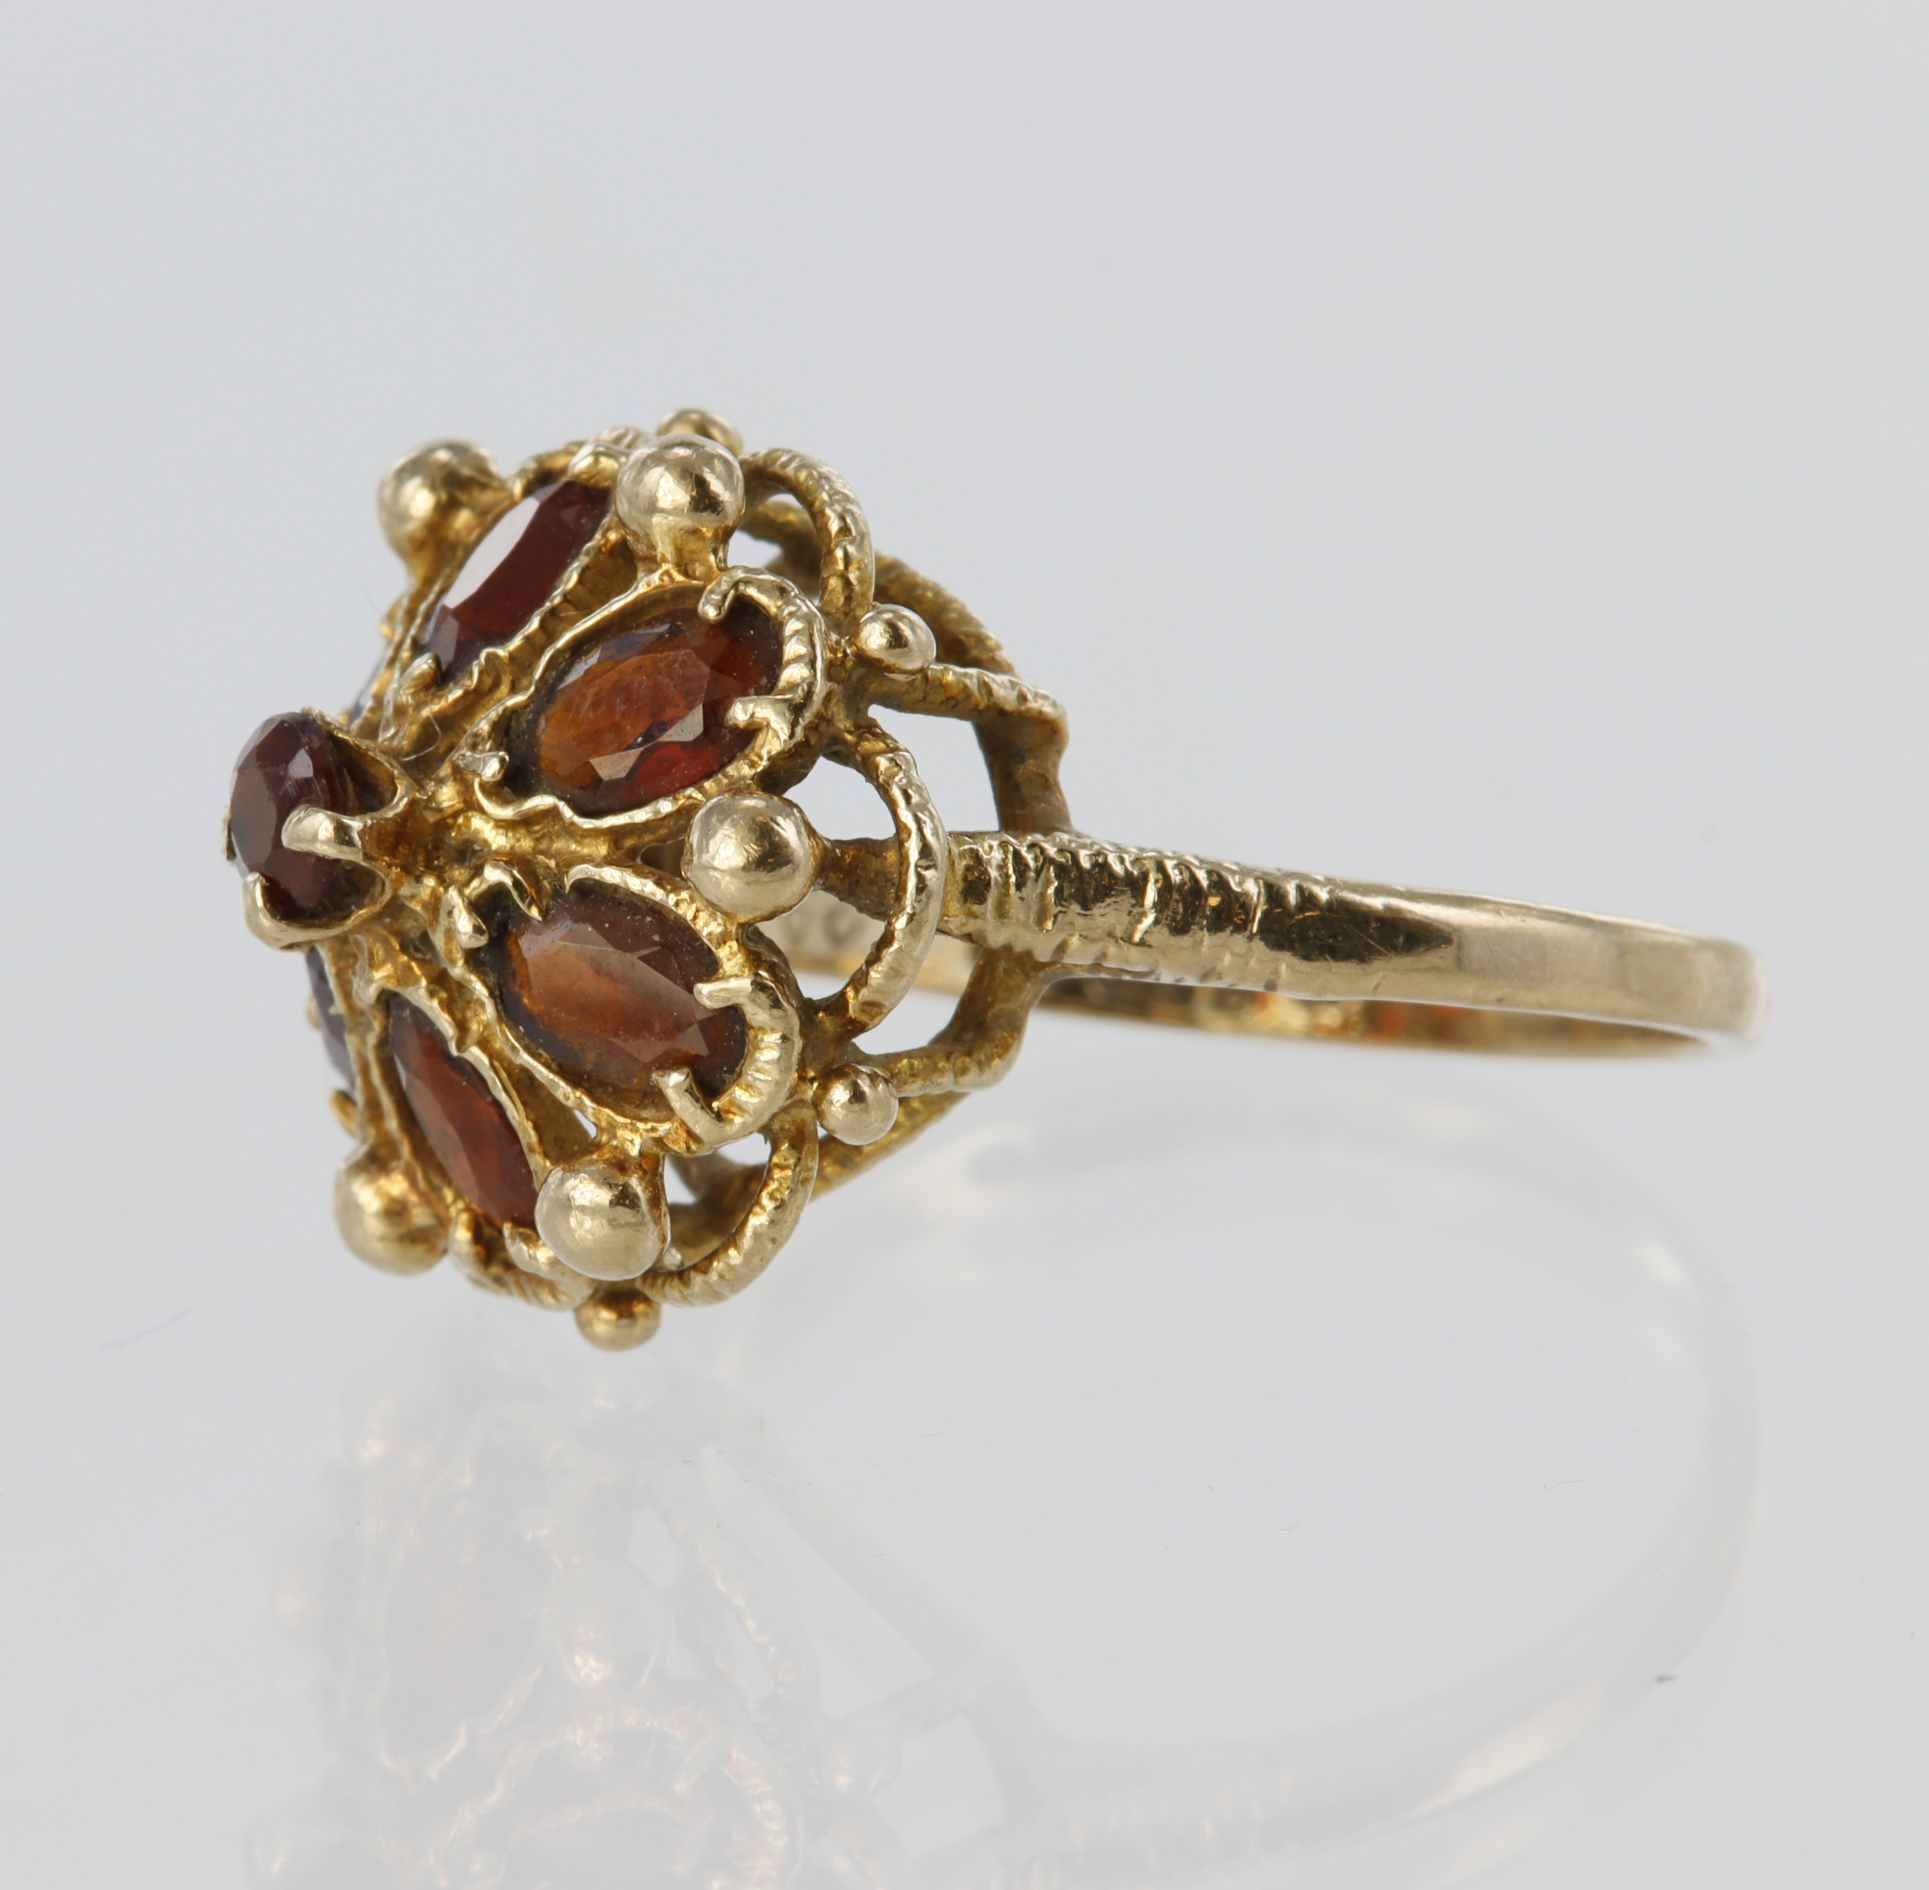 9ct yellow gold dress ring set with a central 2mm round garnet surrounded by six pear shaped garnets - Image 2 of 2